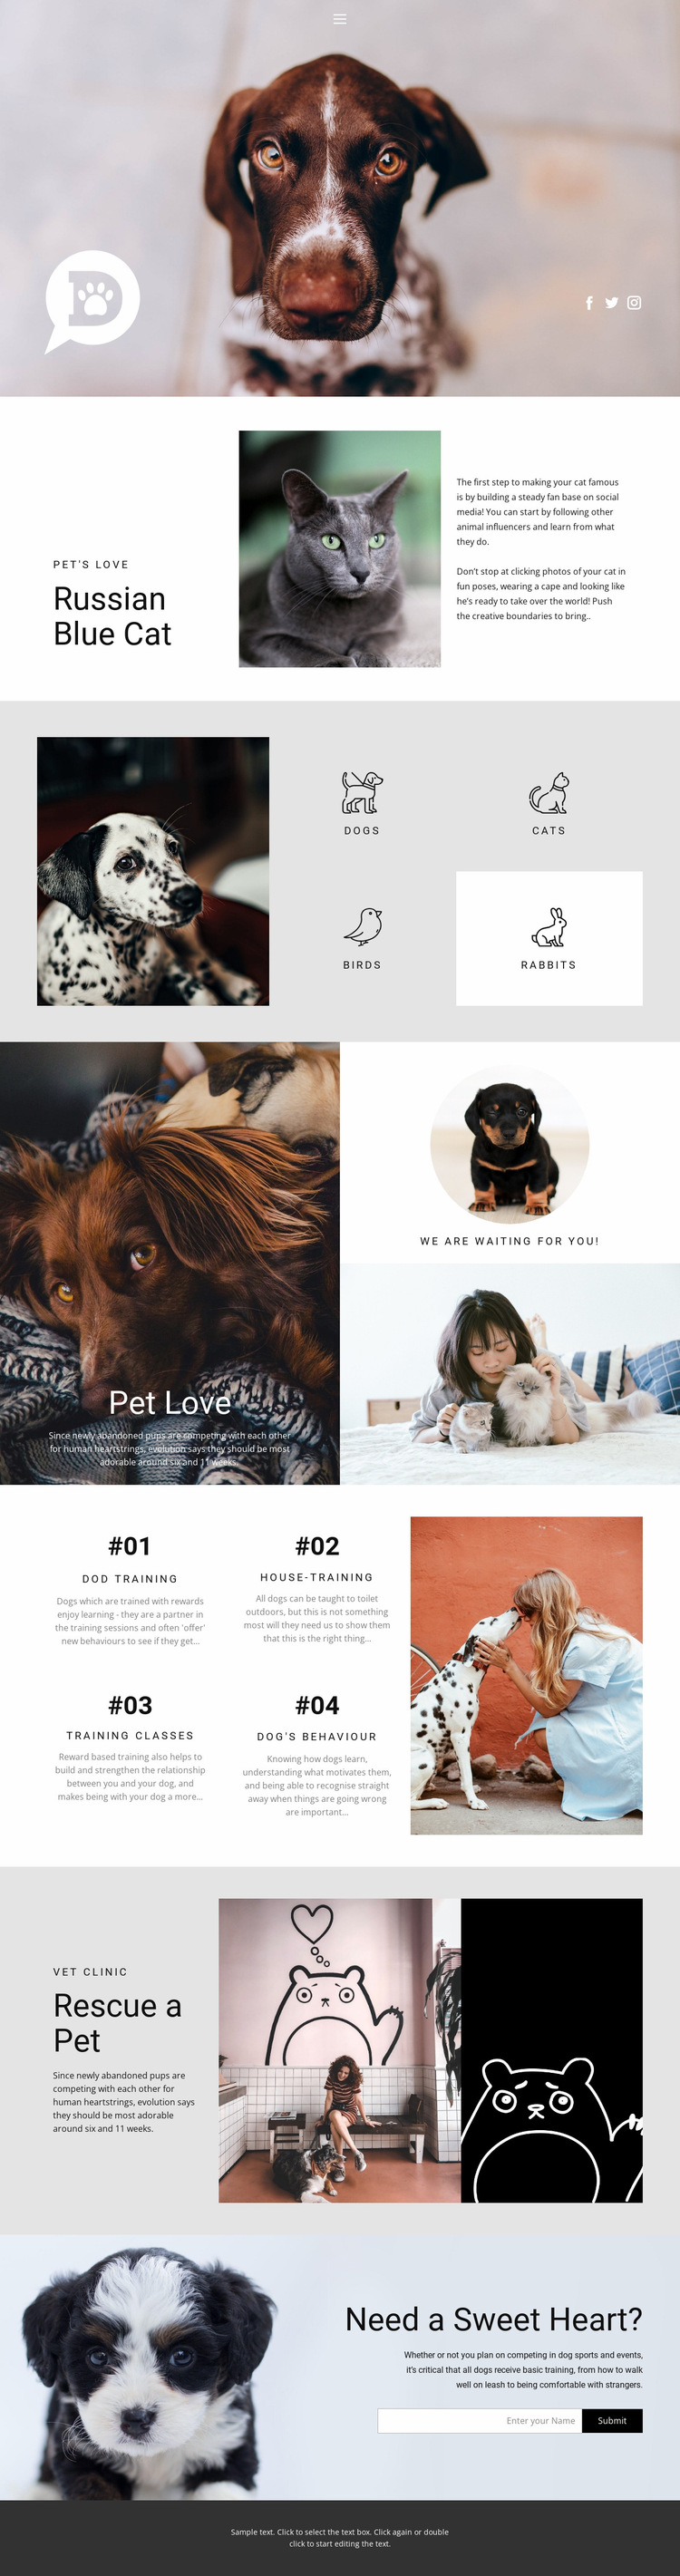 Care for pets and animals Website Builder Templates